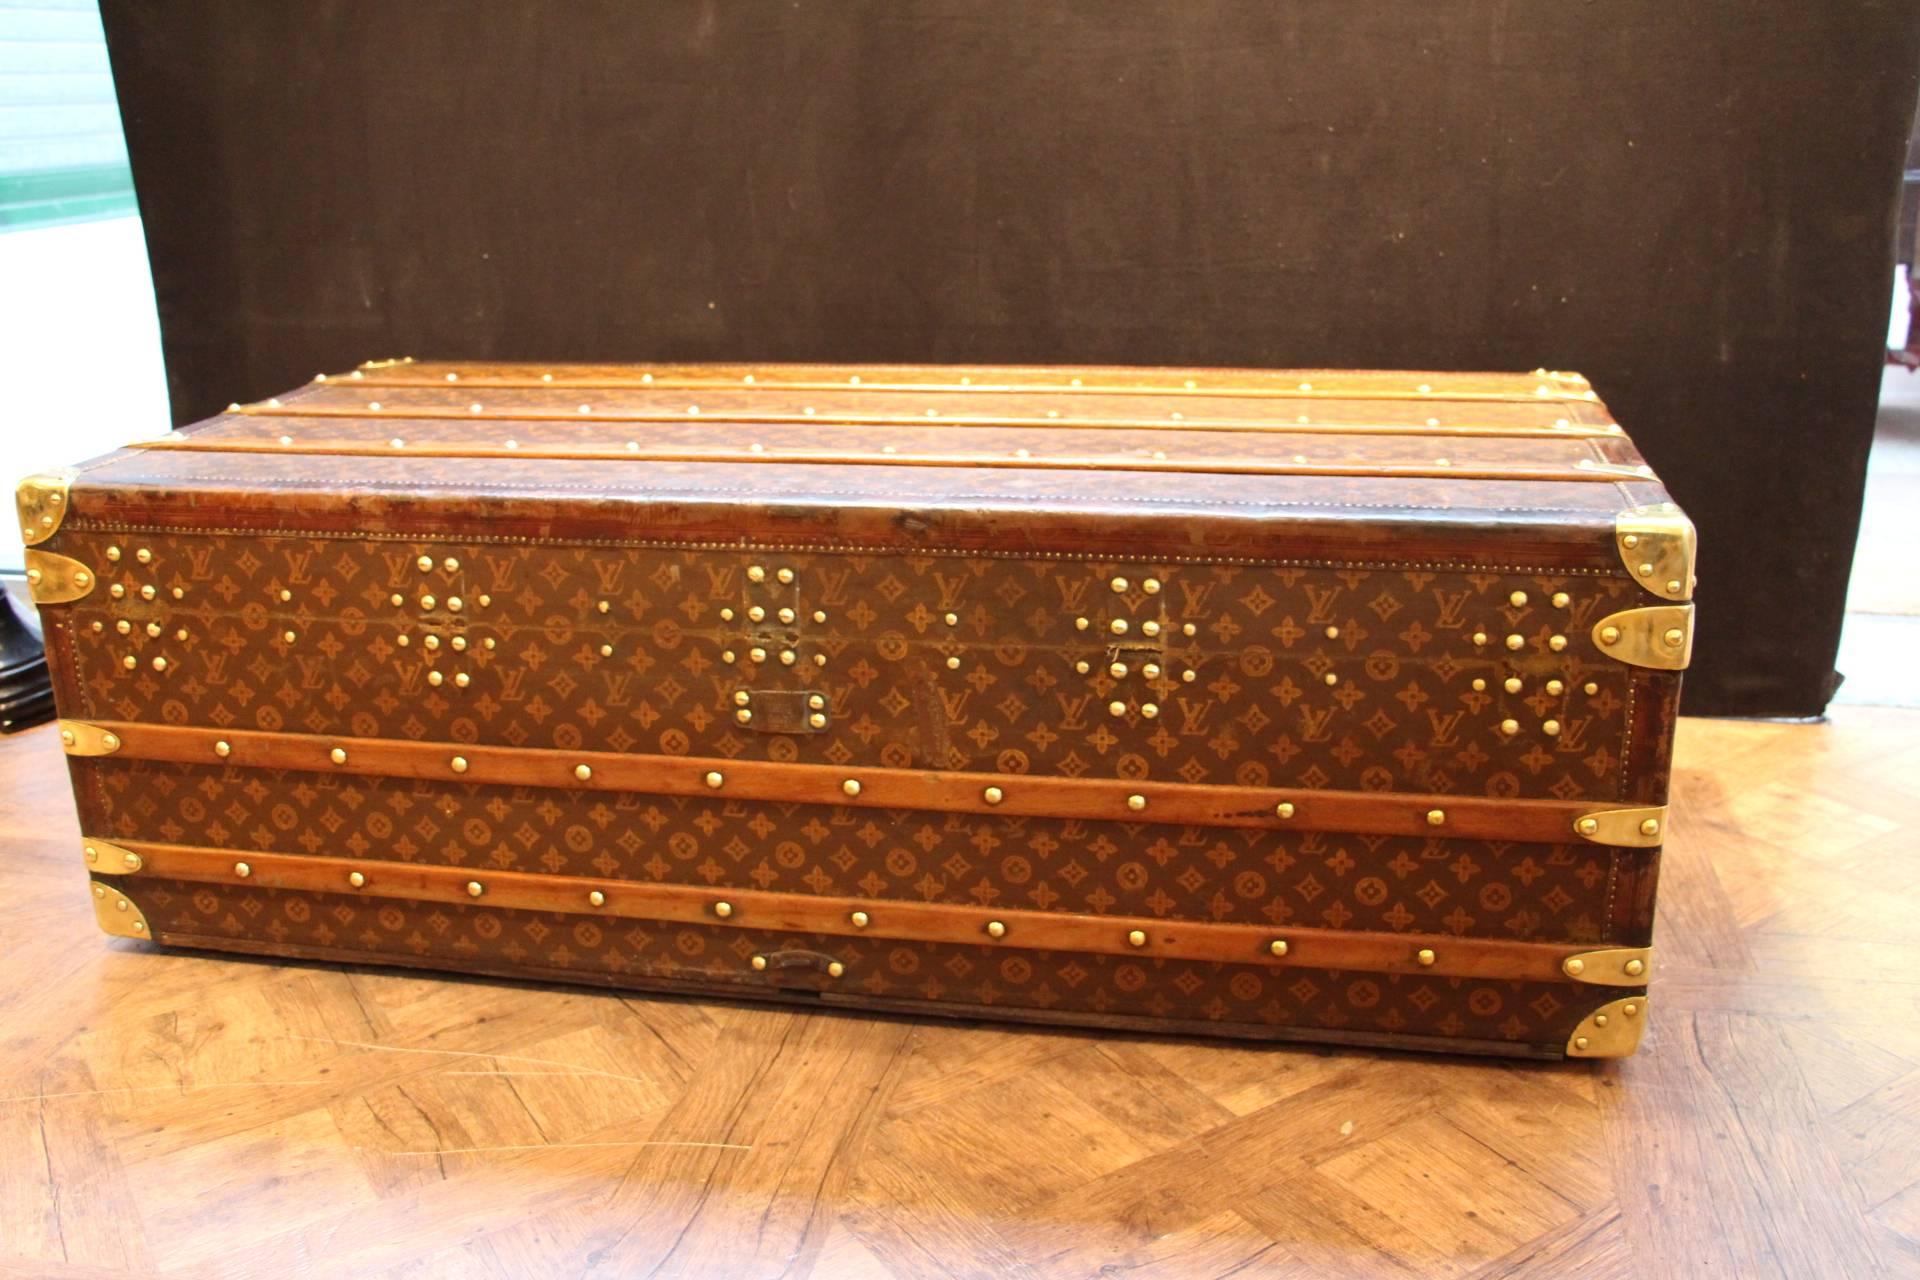 This Louis Vuitton trunk features monogram canvas, brass corners locks, stamped studs and side handles as well as leather trim.
Its interior features a removable tray and it is all original in vey good condition. It is clean and doesn't smell.
Its